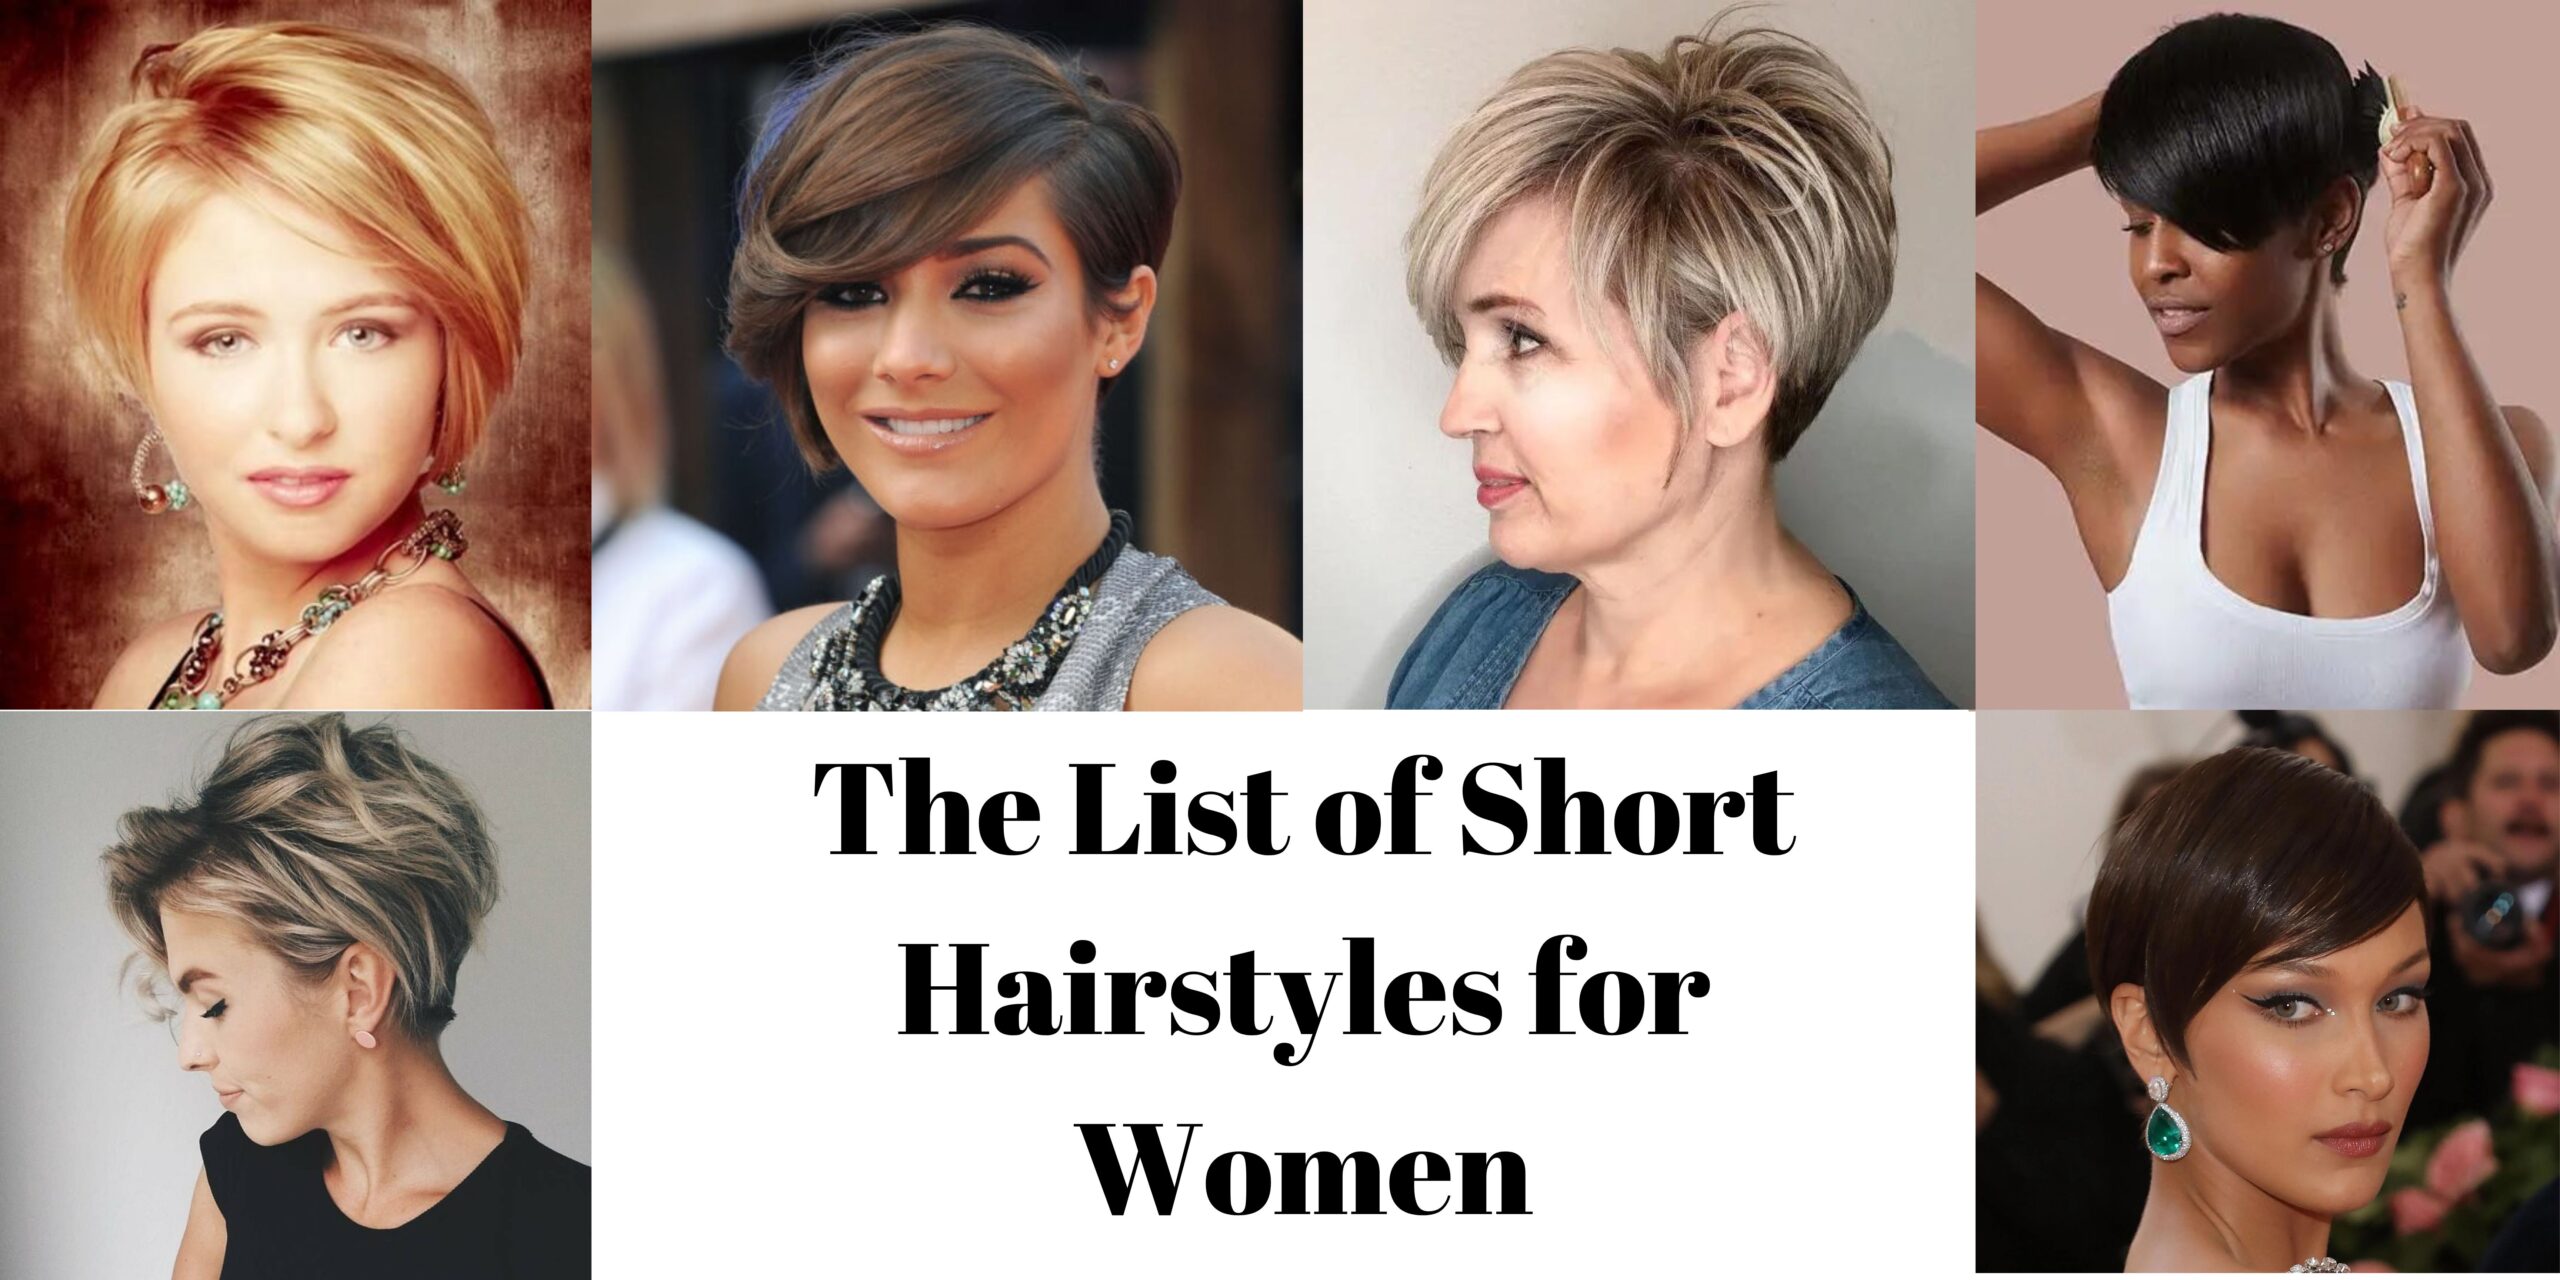 Follow The List Of Short Hairstyles for Women